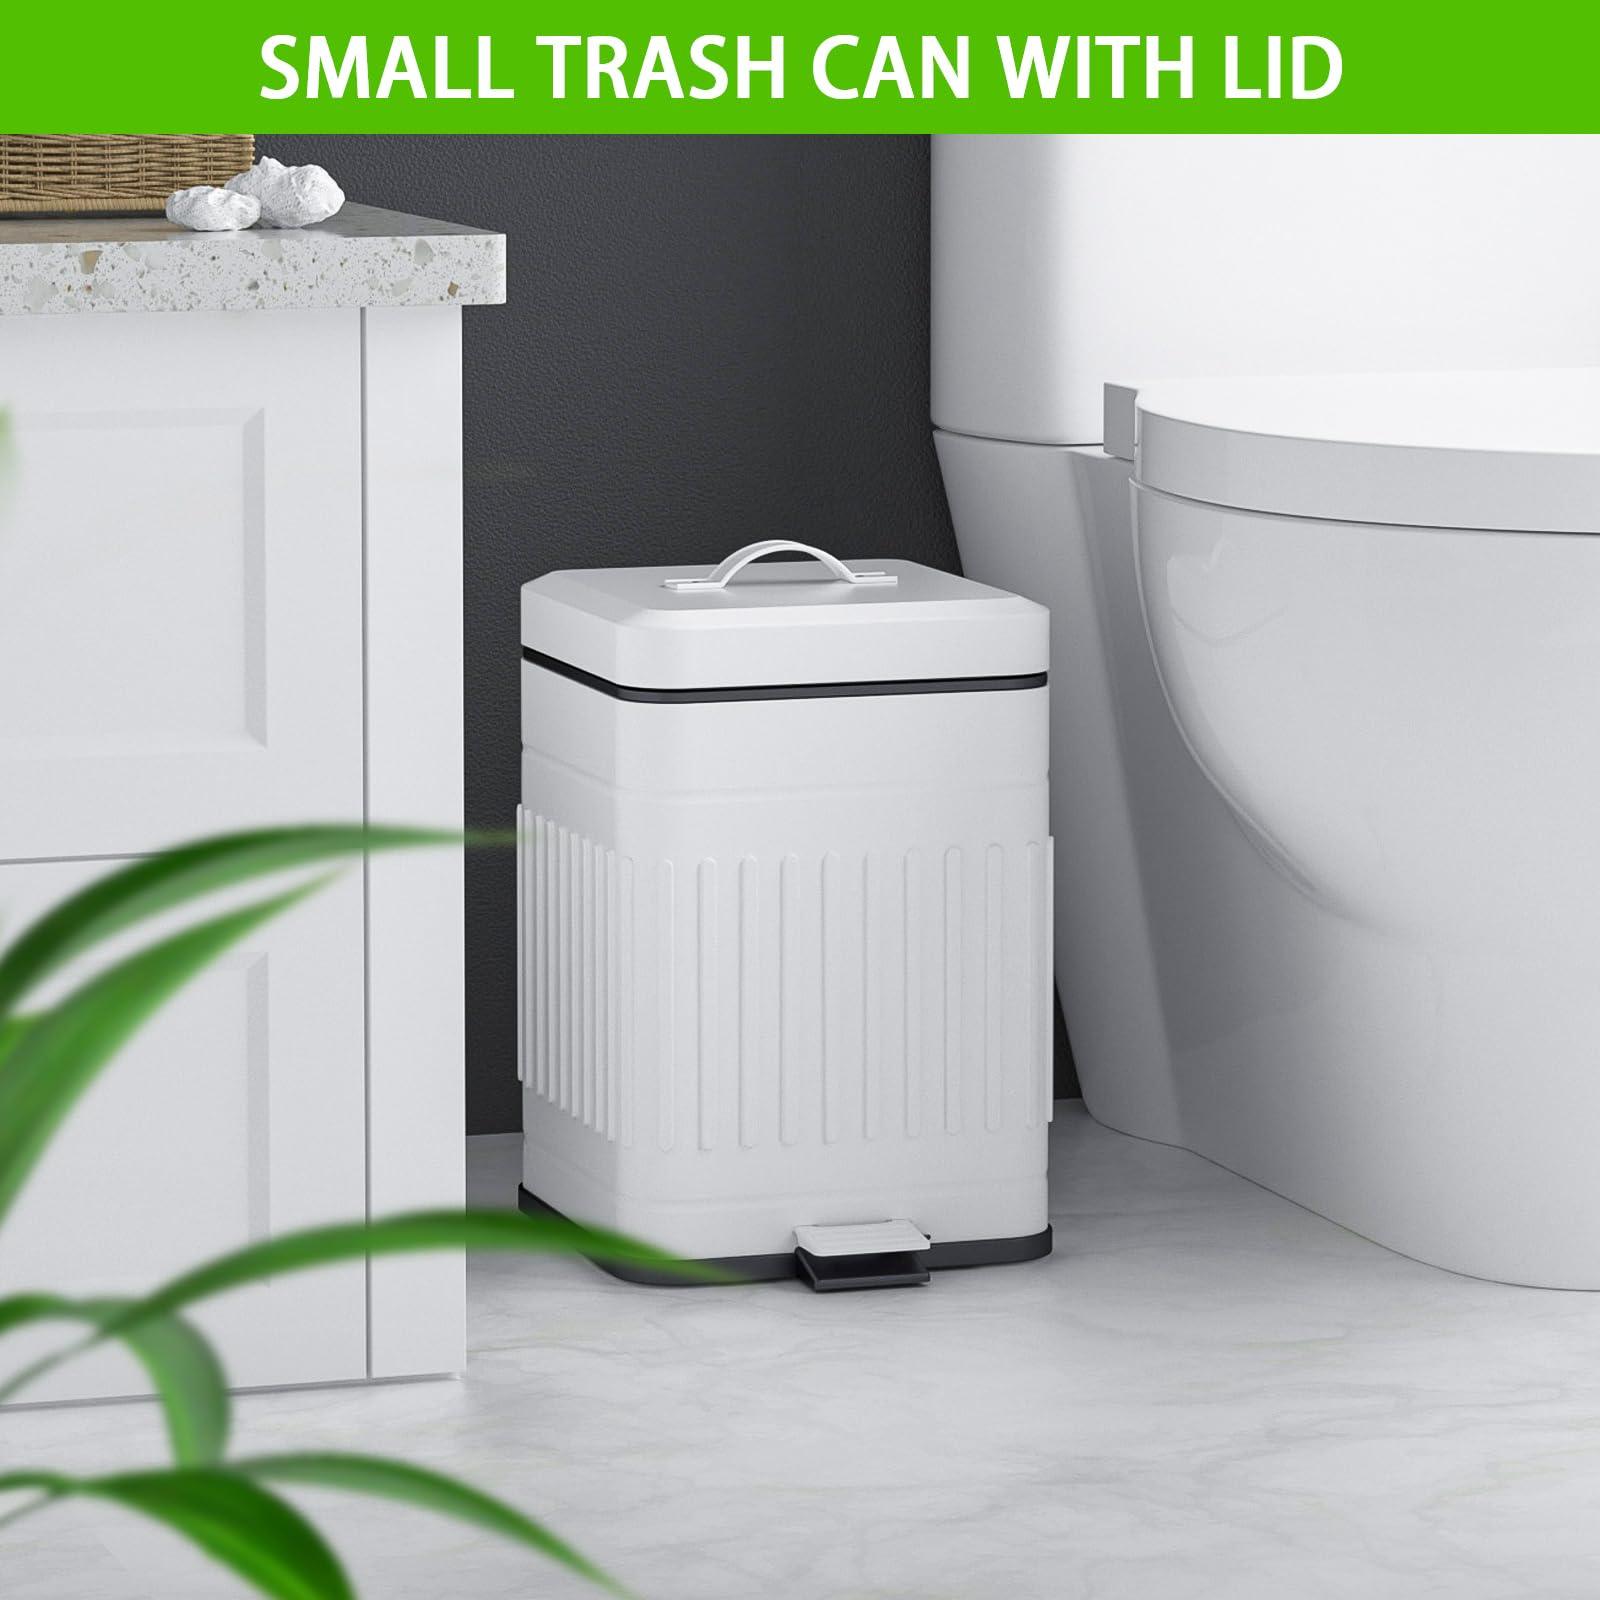 CEROELDA Small Trash Can with Lid-5L/1.3 Gal, Stainless Steel Outdoor Dog Poop Garbage Can-Farmhouse Retro Metal Waste Bin w/Step Pedal for Bathroom Bedroom Office-Soft Close-White - CookCave